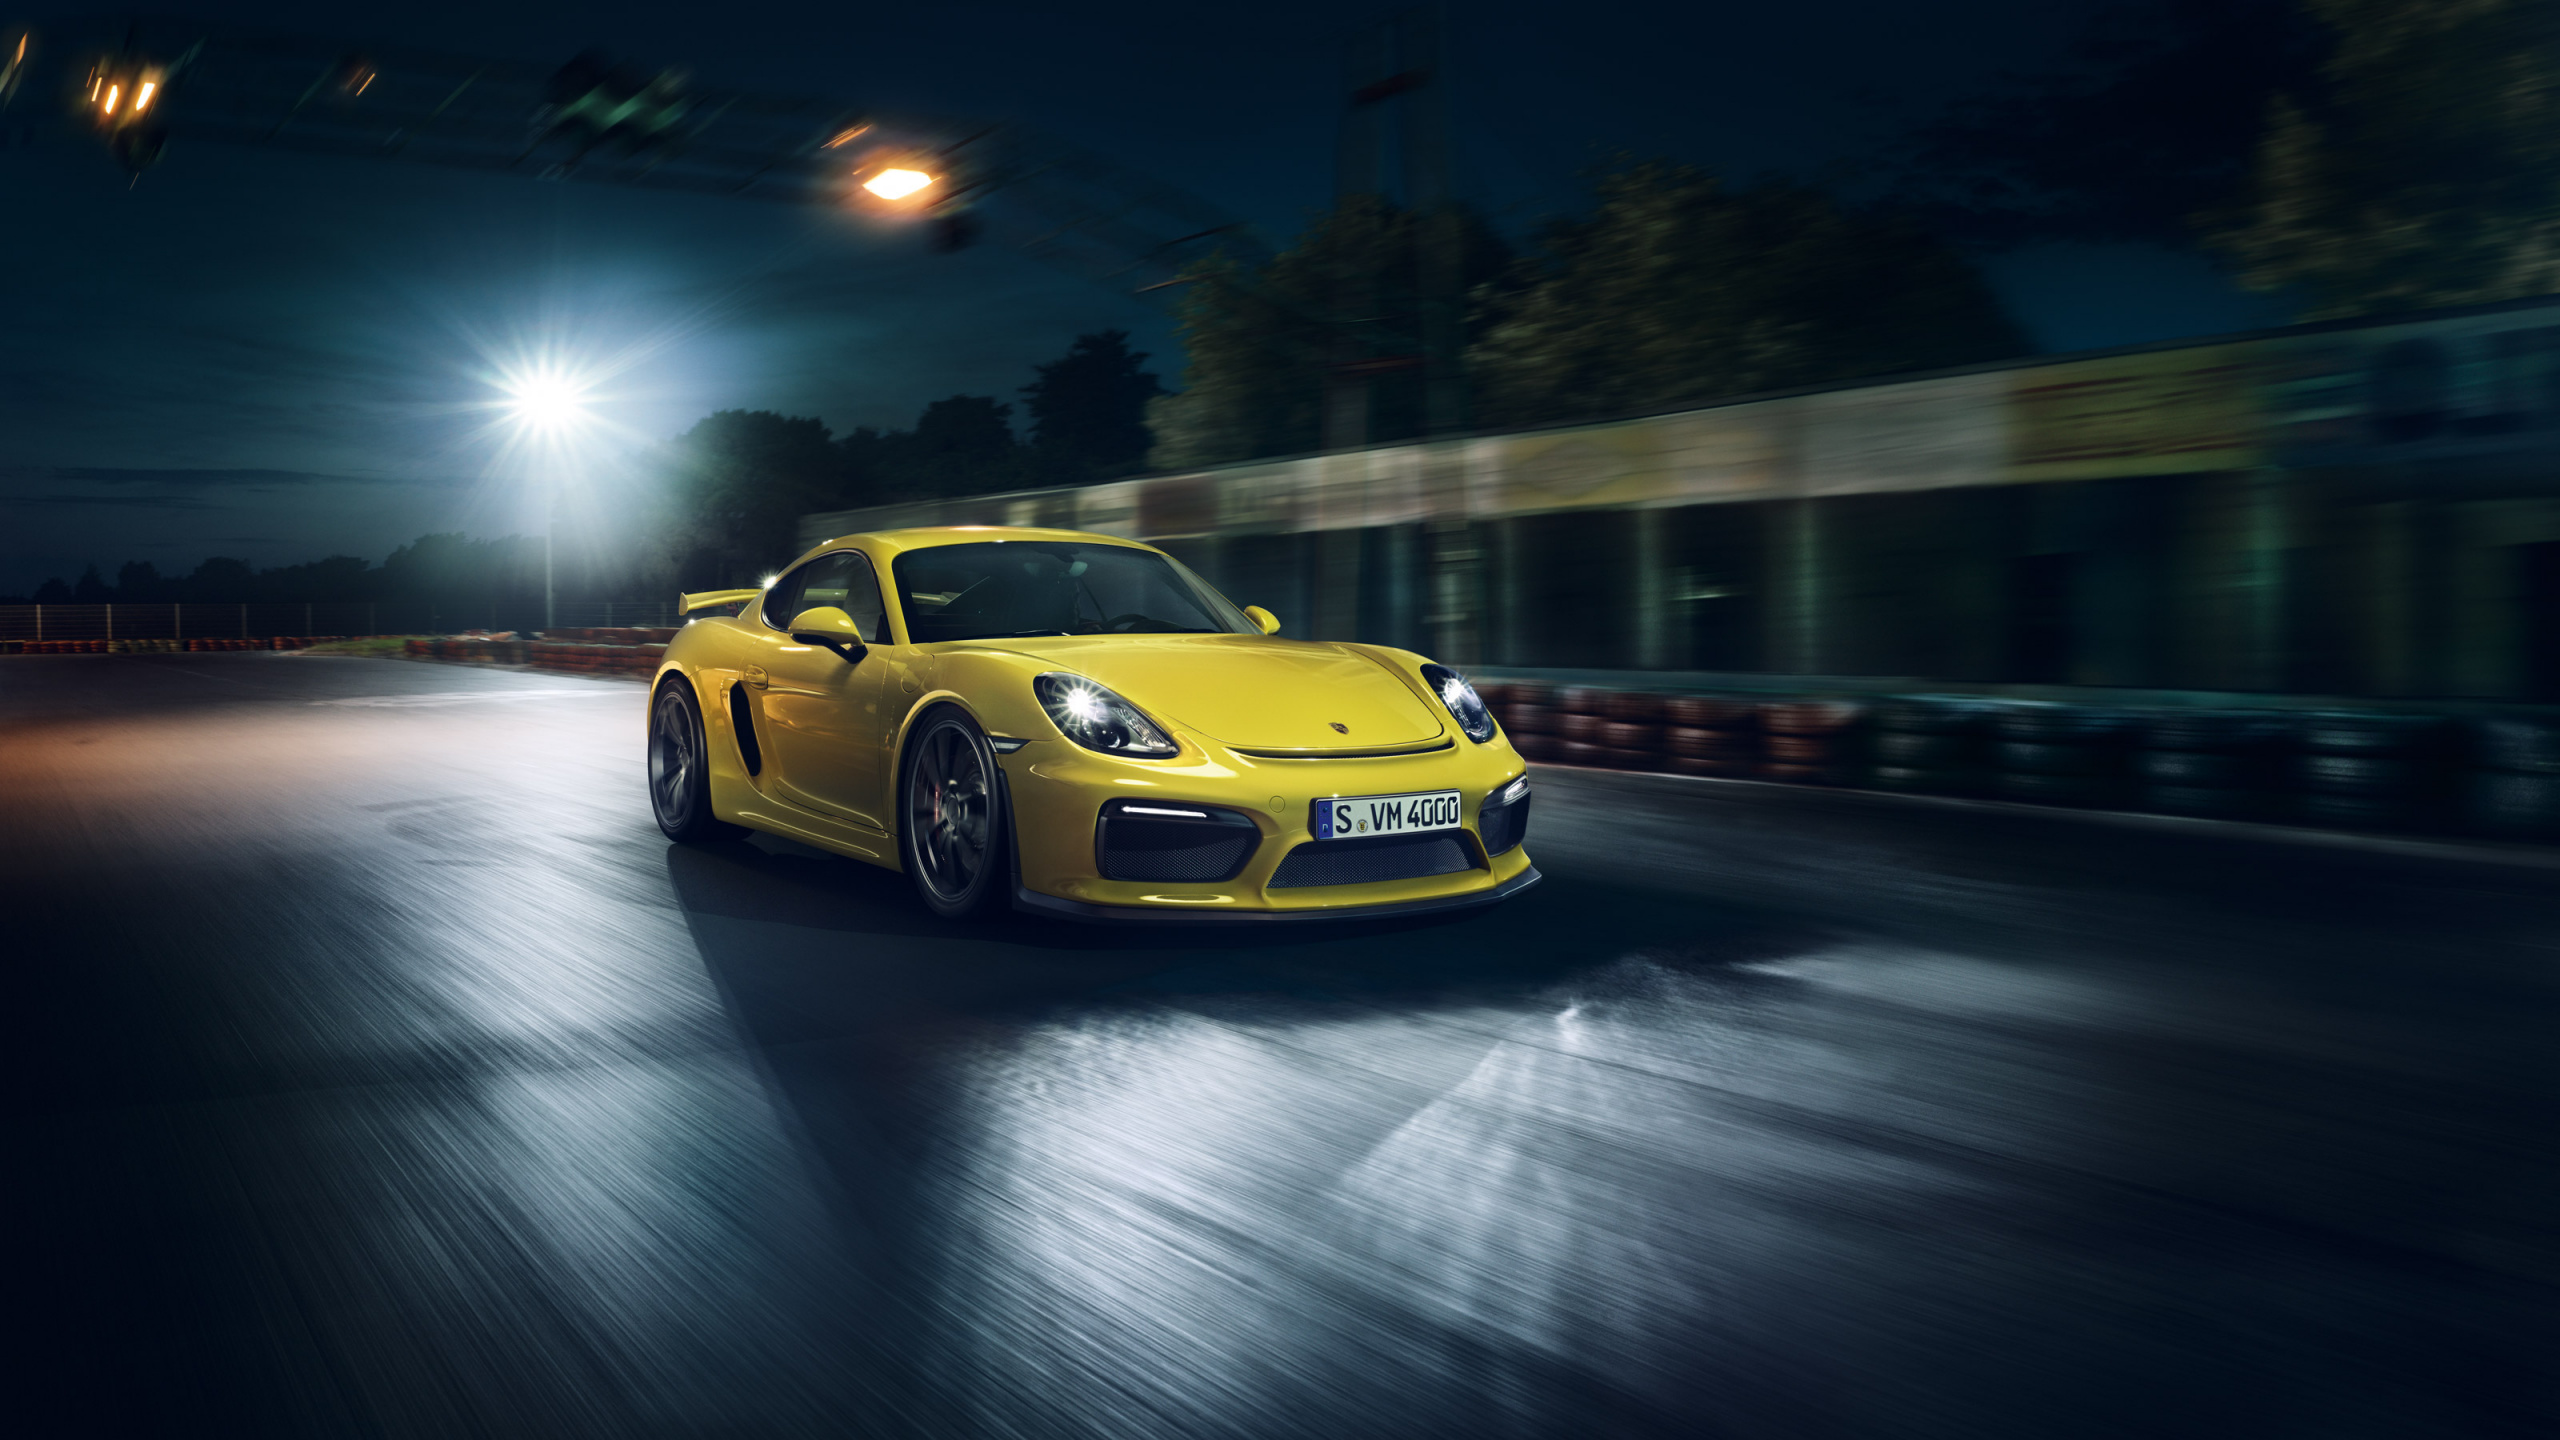 Yellow Porsche 911 on Road During Night Time. Wallpaper in 2560x1440 Resolution